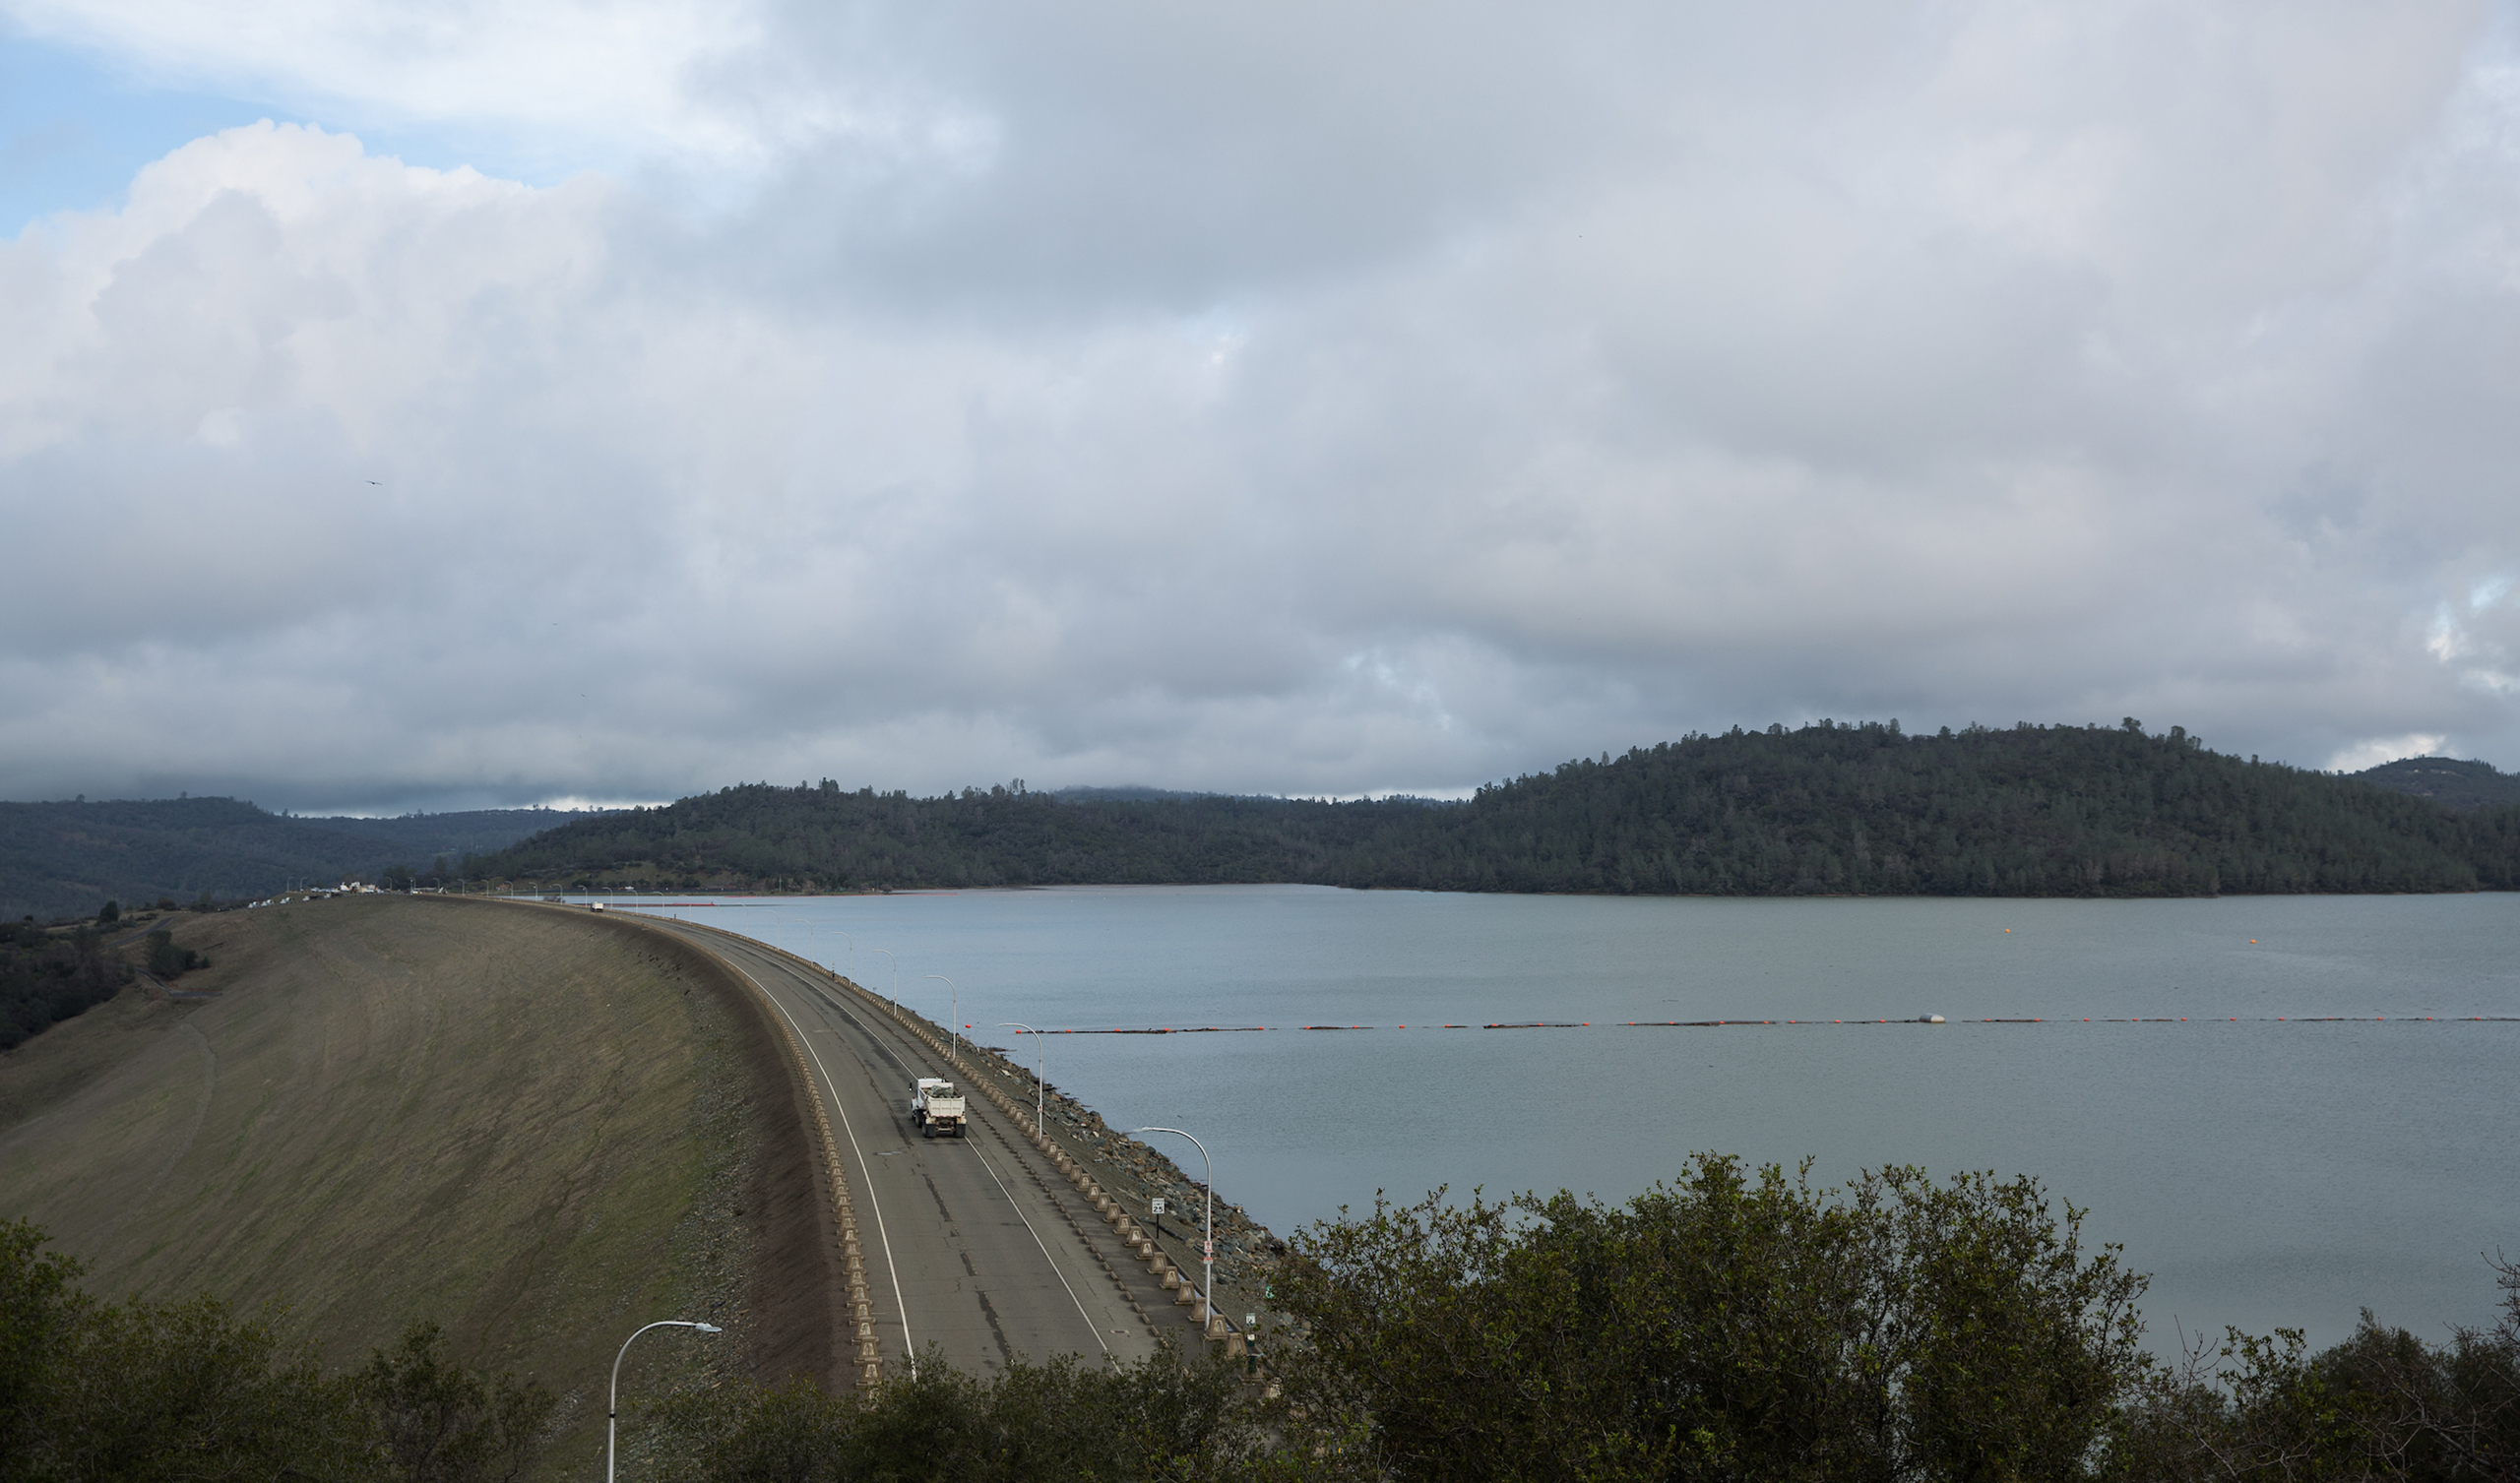 The Oroville reservoir level sits very close to the top of Oroville Dam in Oroville, Calif., on Feb. 10, 2017.